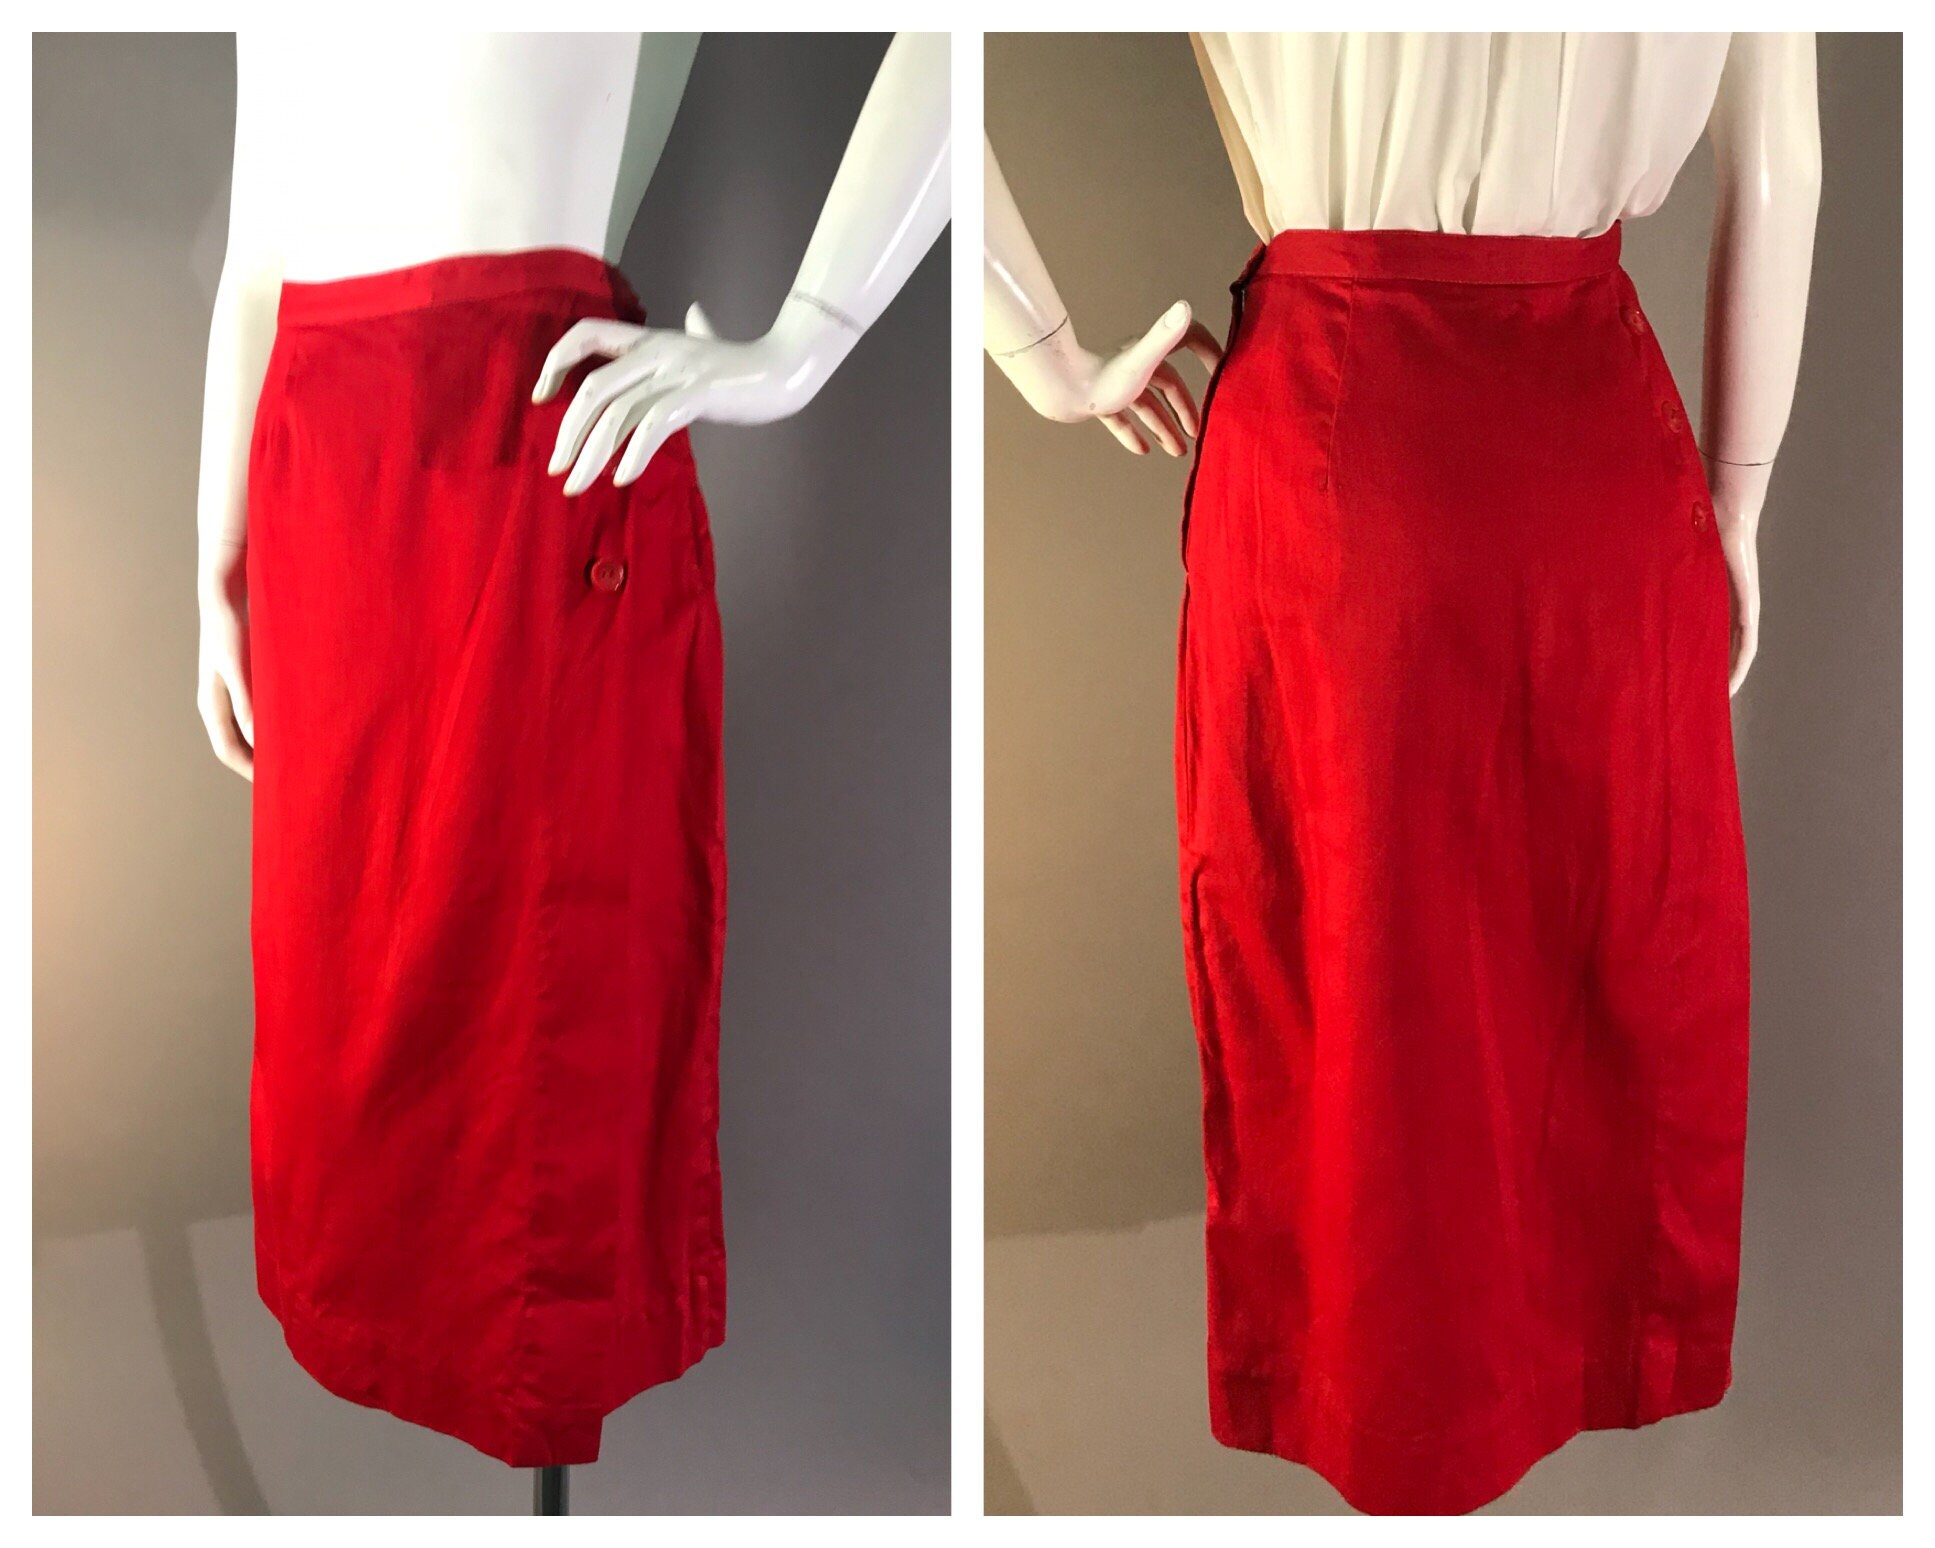 50s skirt capris 1950s RED COTTON SKIRT with pants underneath | Etsy